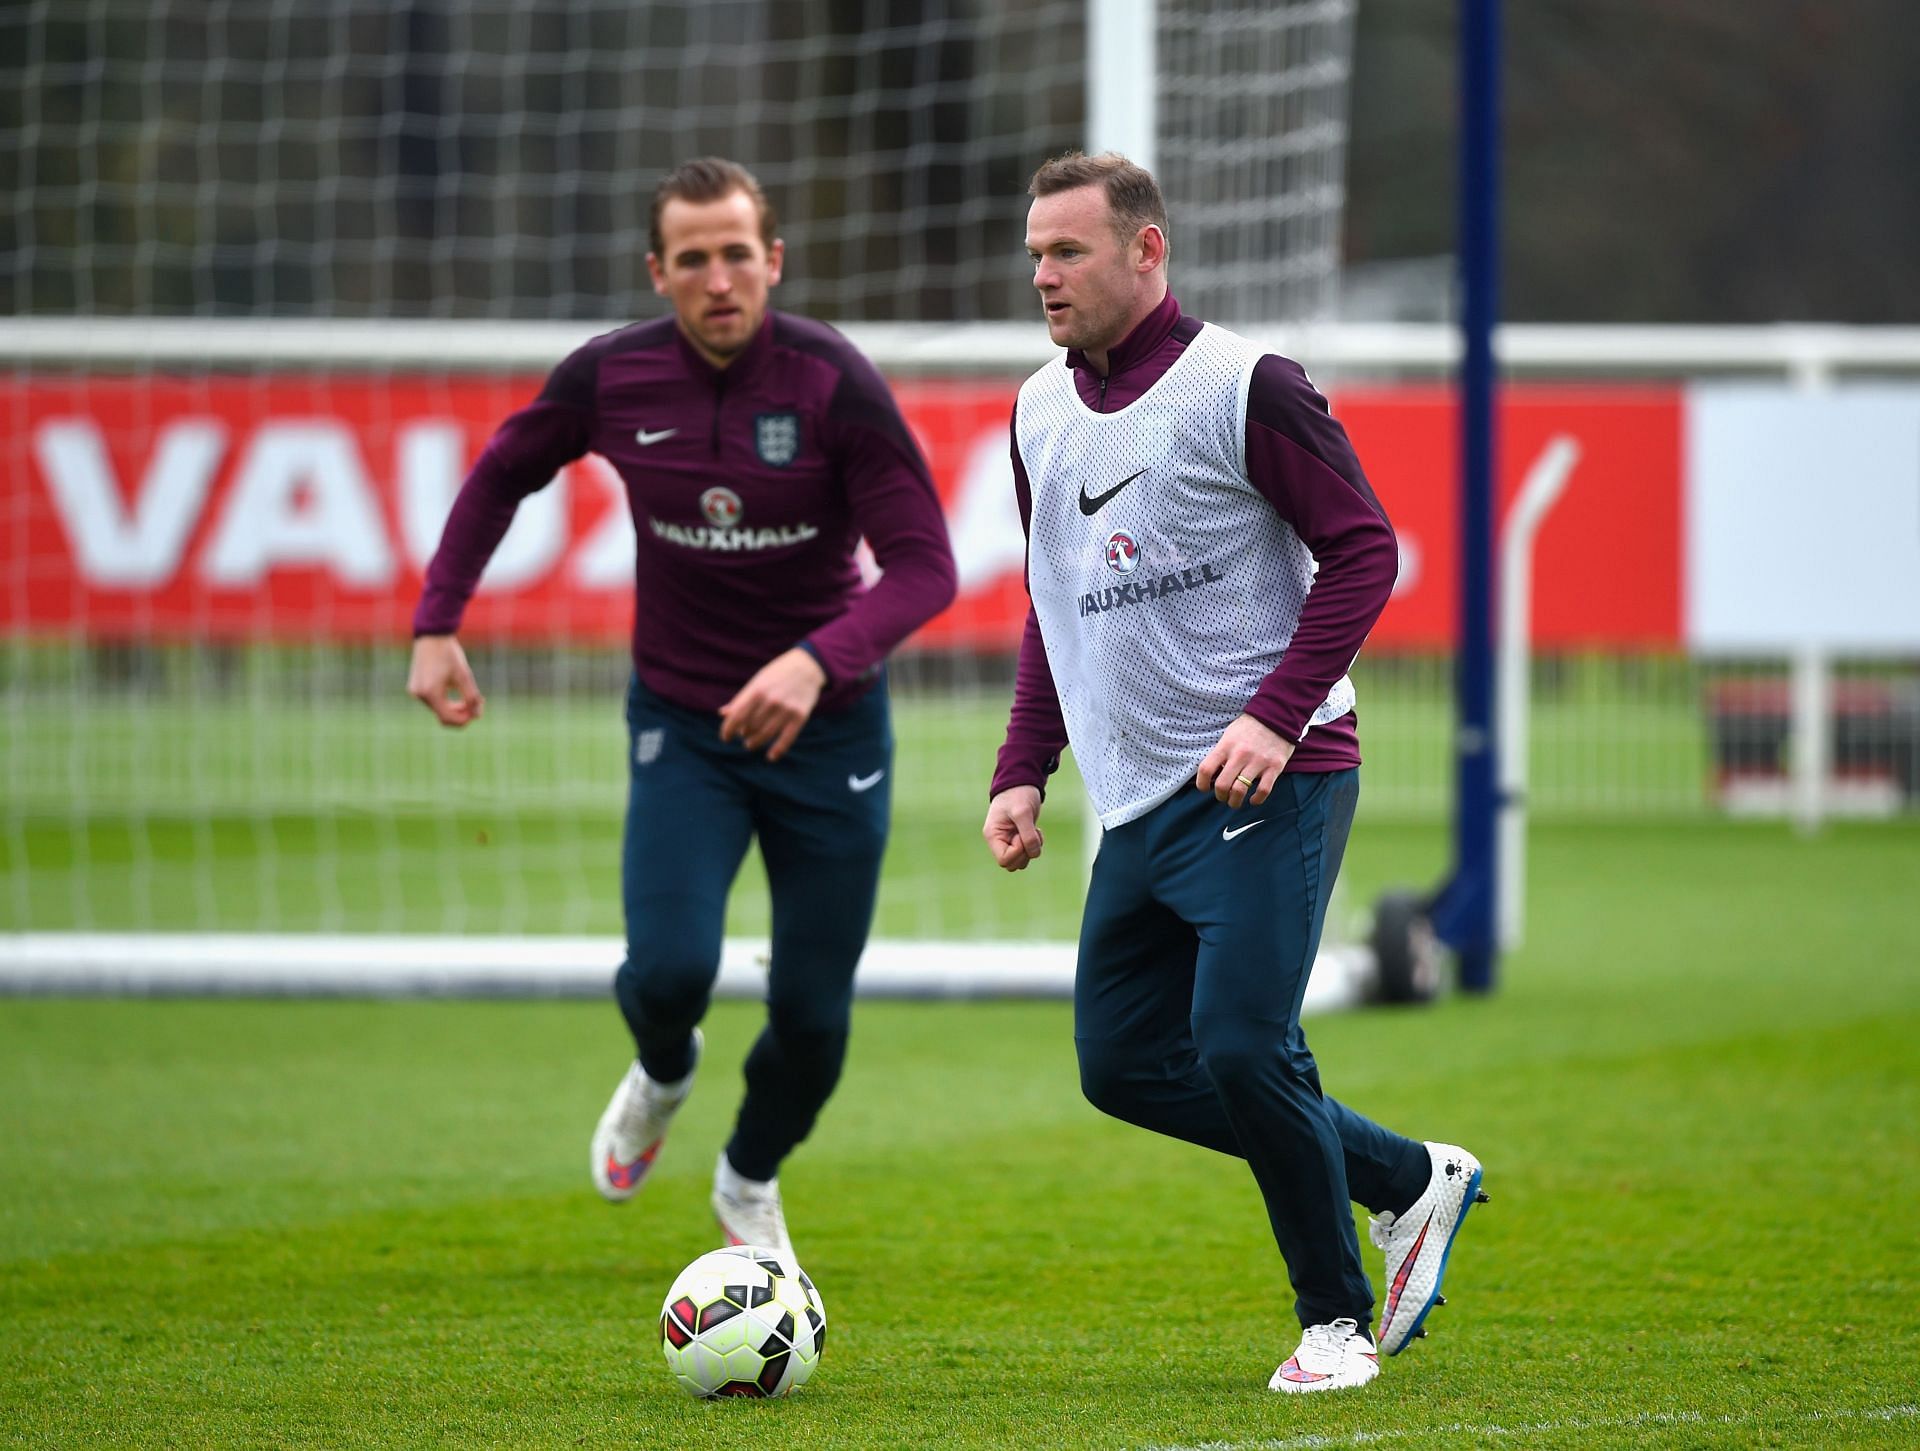 Wayne Rooney (right) also congratulated Kane (left).